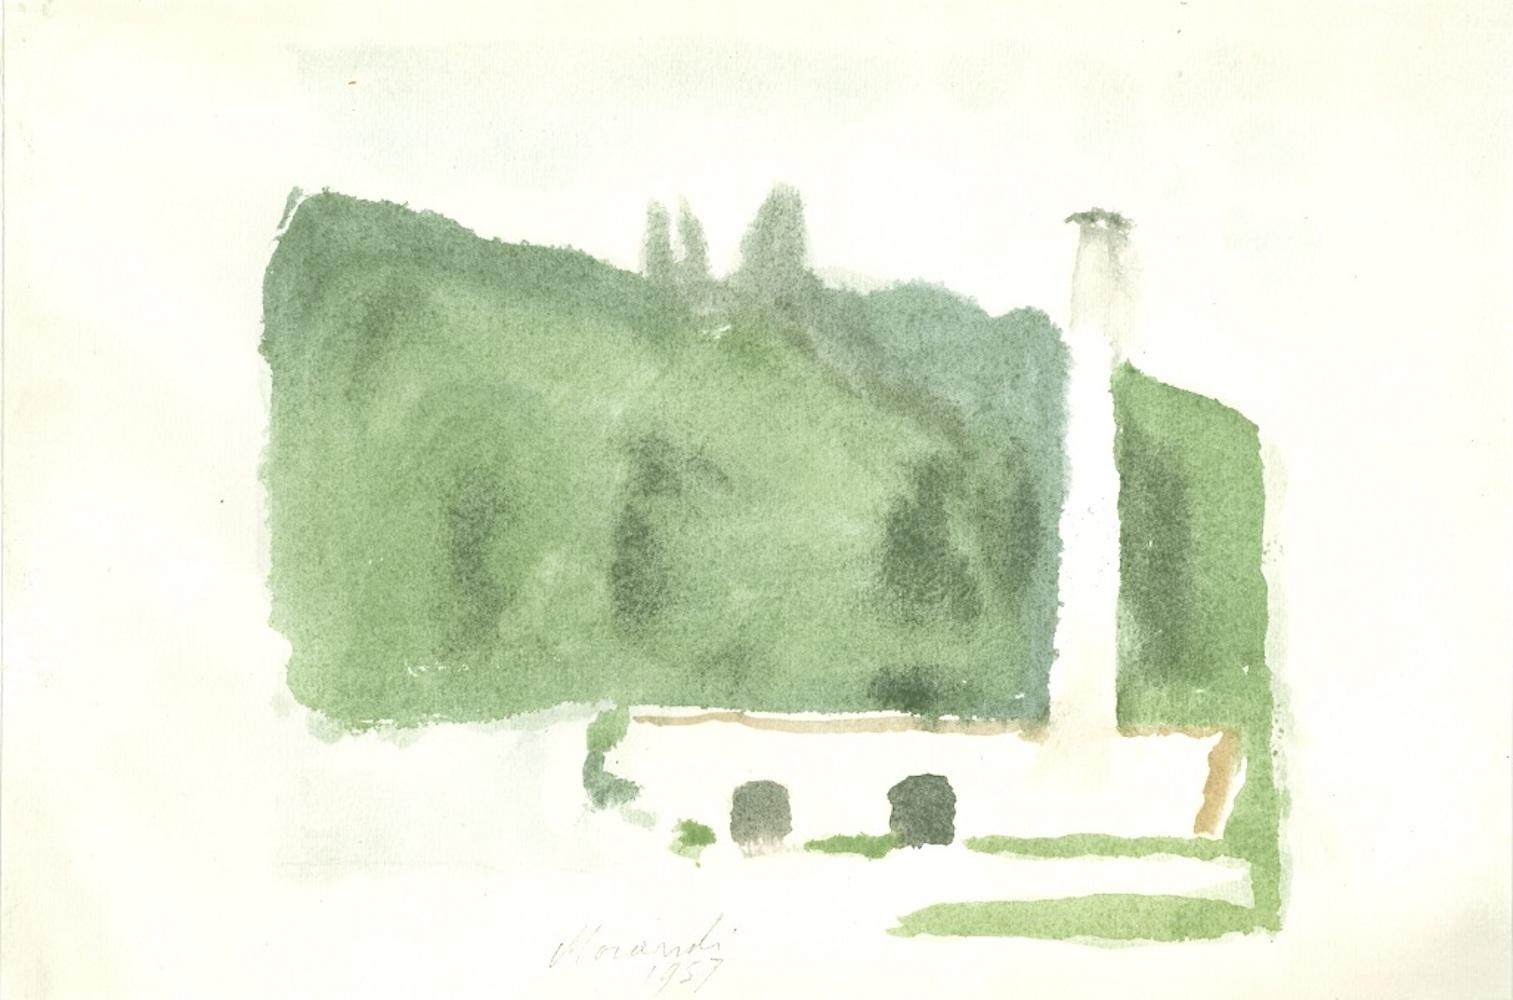 Image dimensions: 20.5 x 30.5 cm.

Landscape is an original offset print, reproducing the original watercolor by Giorgio Morandi.

Signature and date by the artist is perfectly reproduced on plate.

Mint conditions.

From the volume "L'Opera grafica